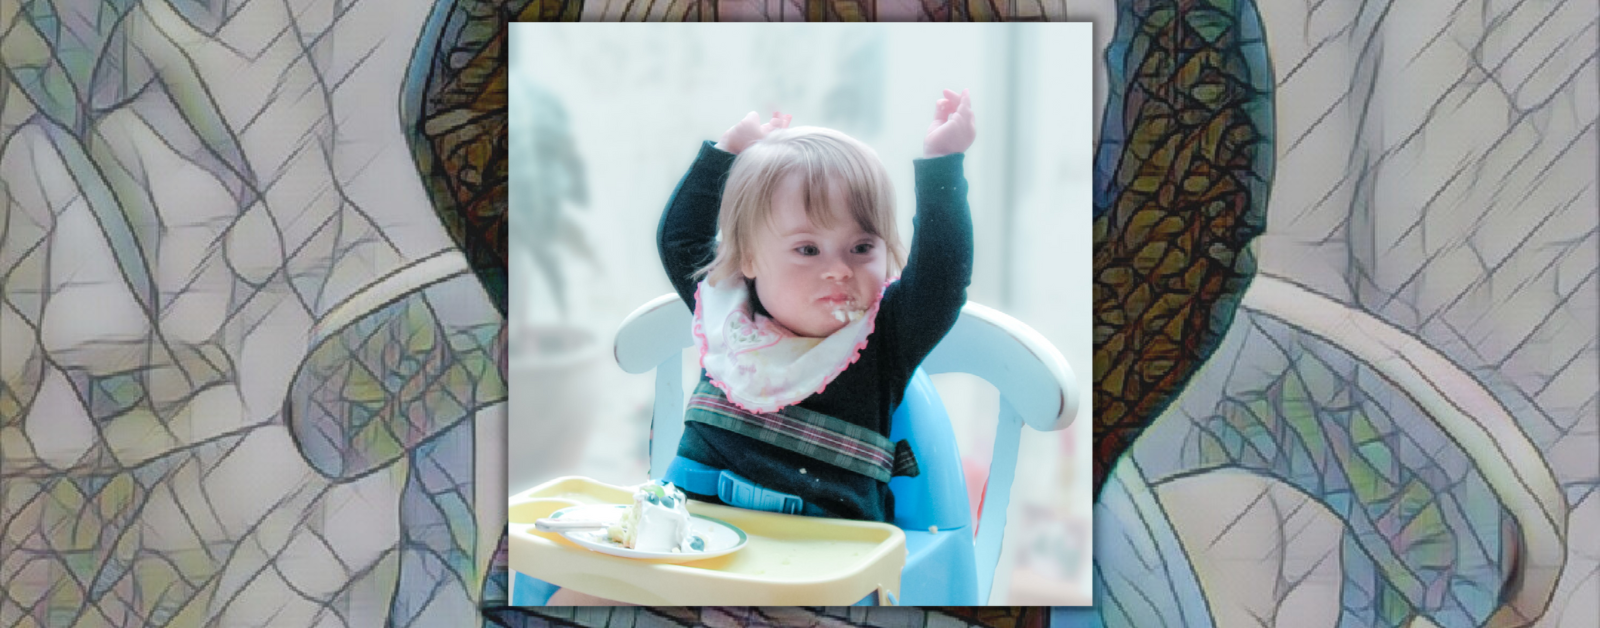 mosaic background behind a photo of one-year-old Penny raising her arms above her head. She is sitting in a high chair with cake on the tray.